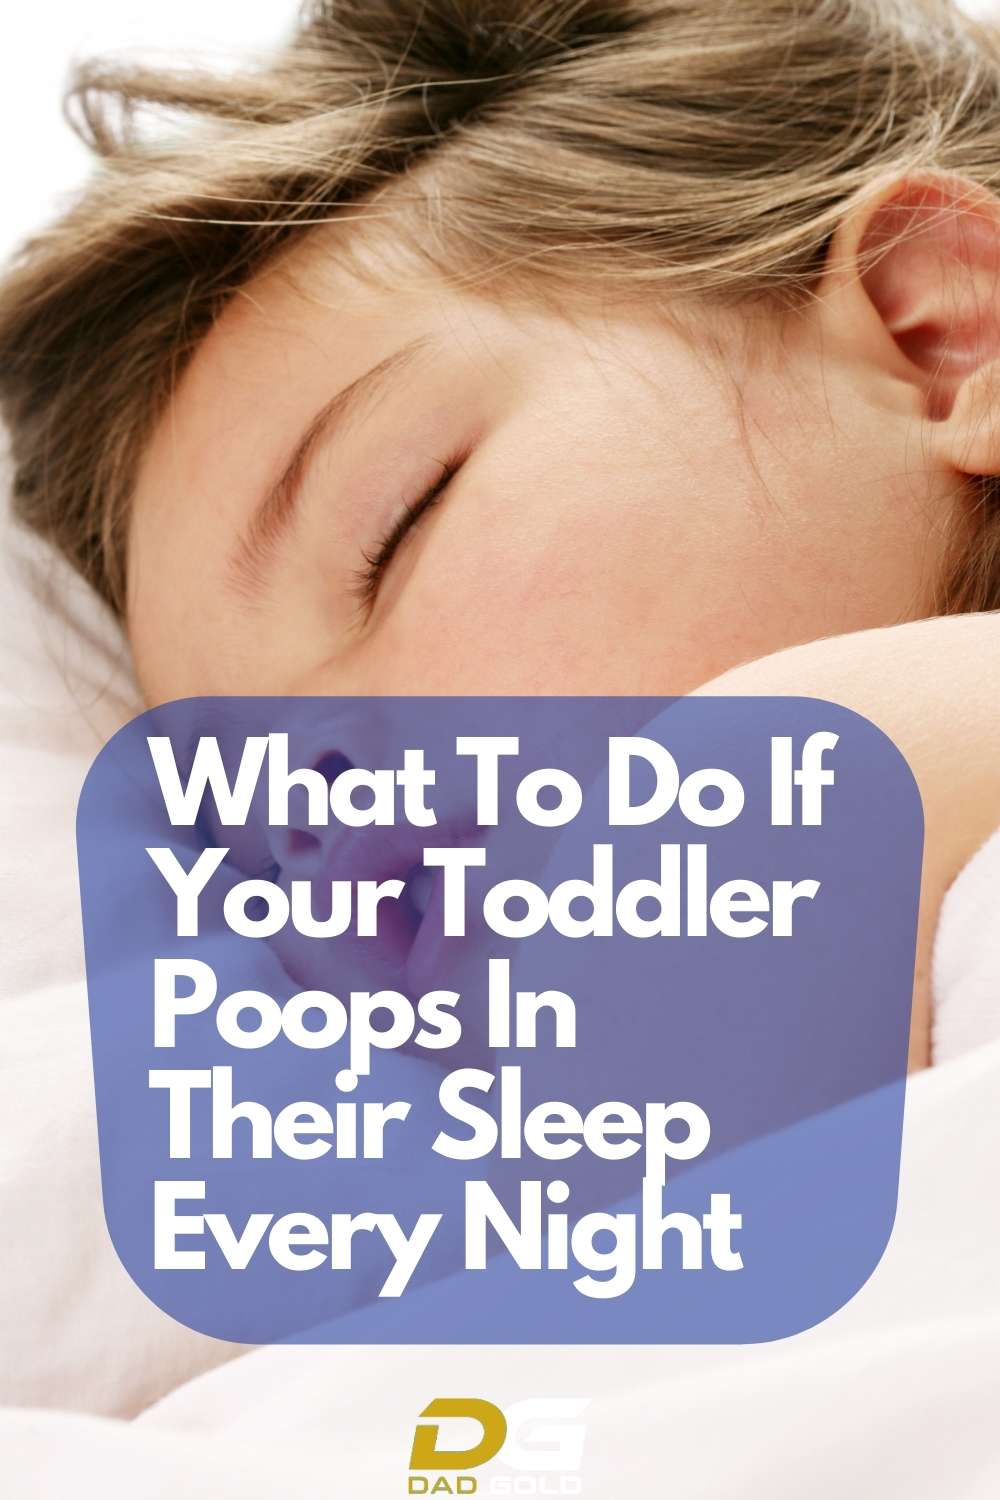 What To Do If Your Toddler Poops In Their Sleep